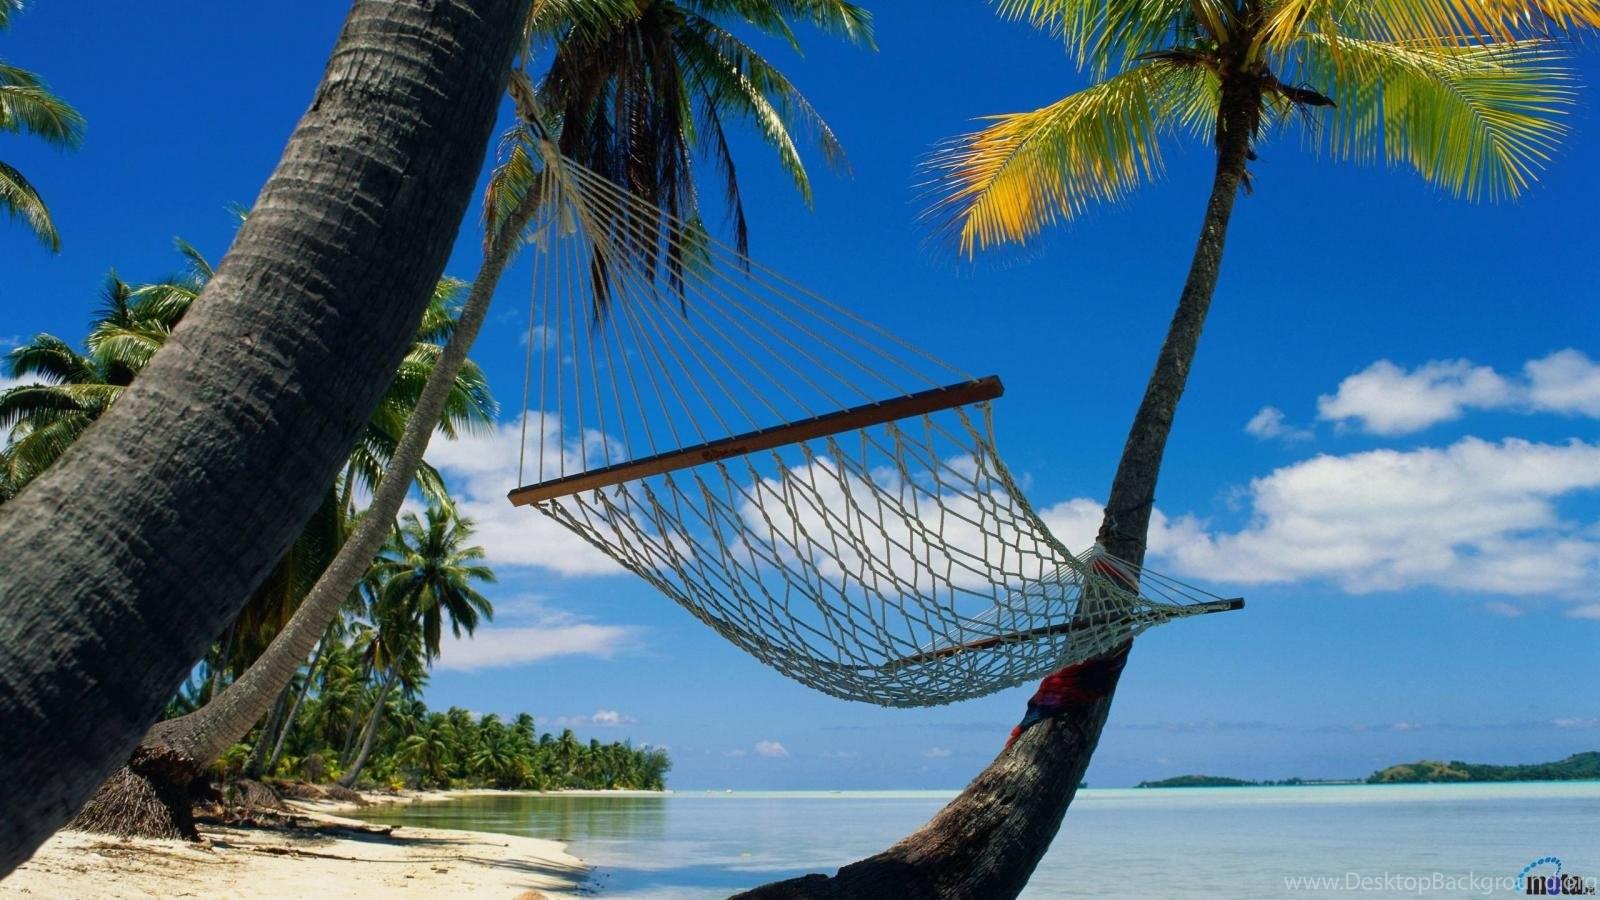 Download Wallpaper Hammock In A Tropical Paradise 1600 X 900